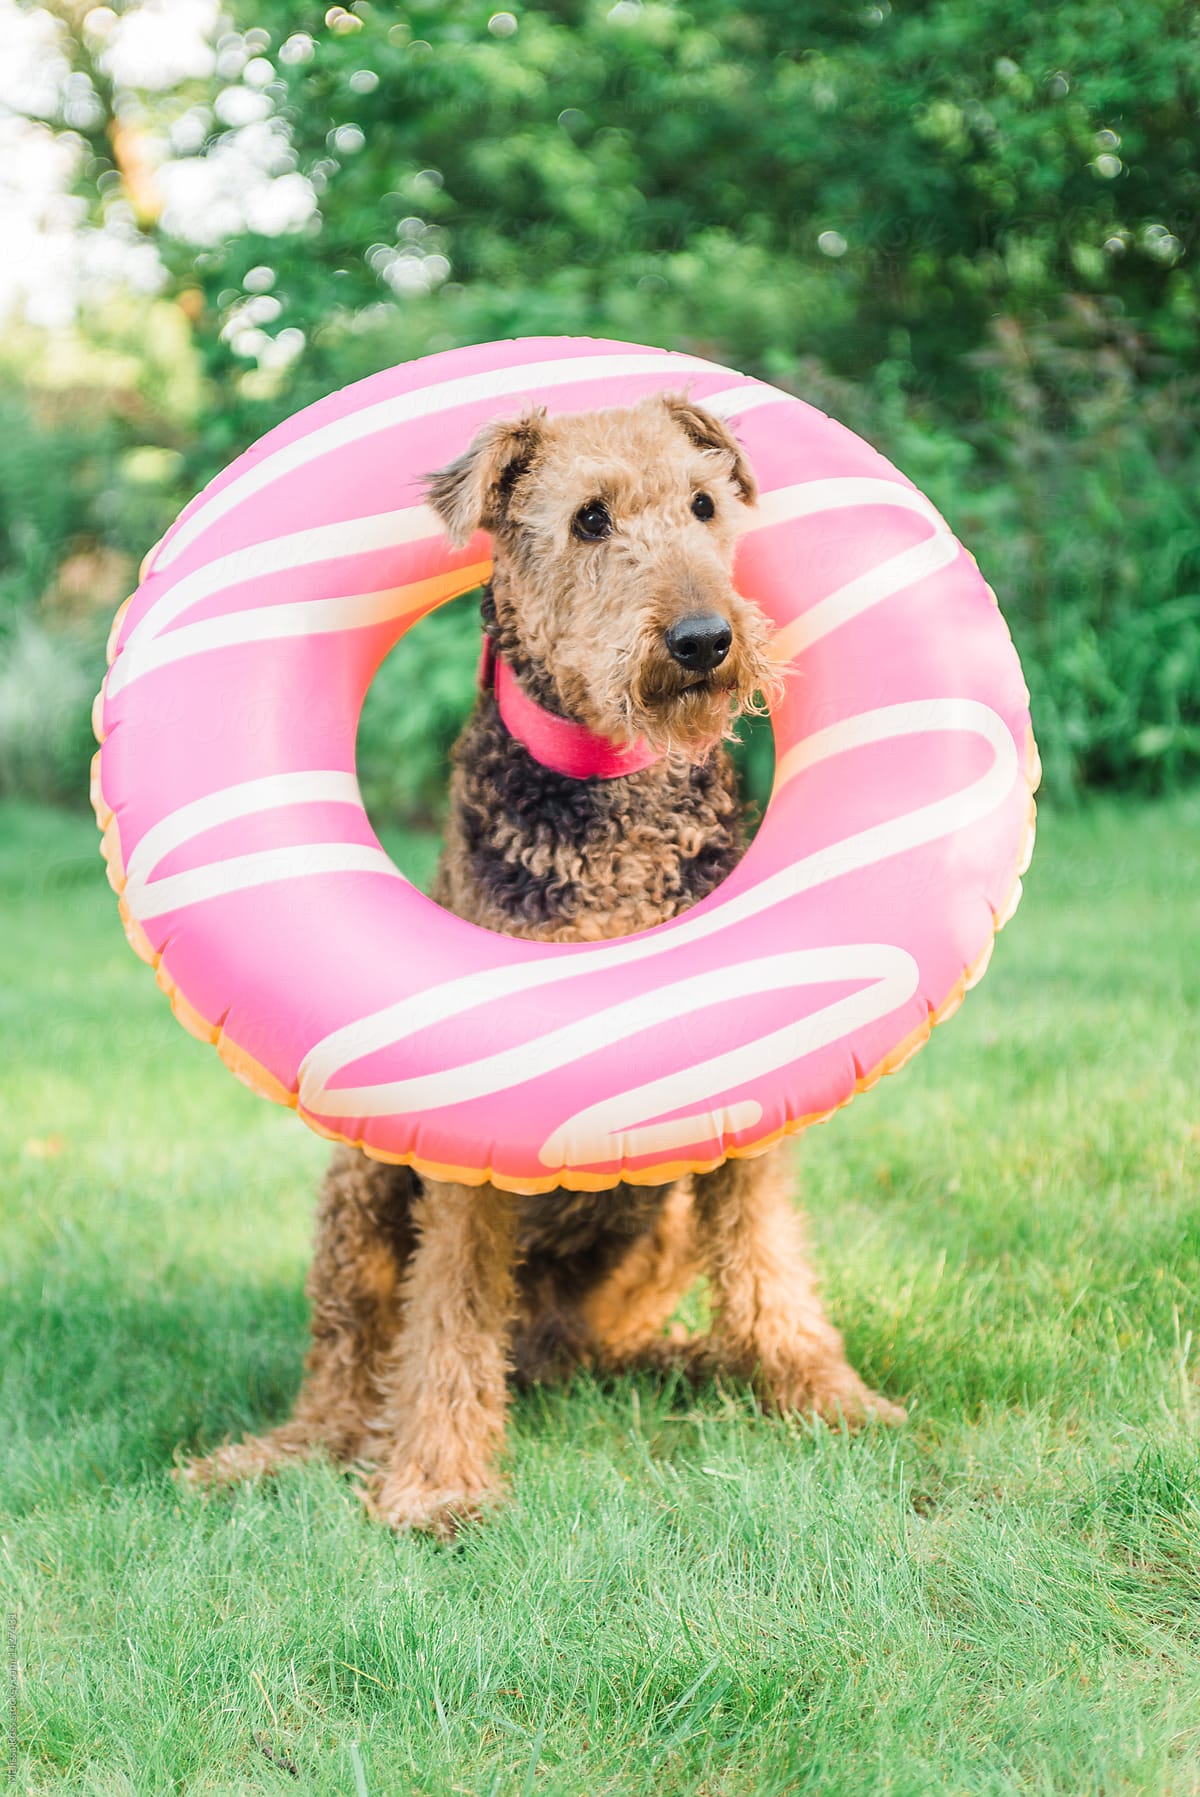 Large brown dog wearing large donut inflatable.